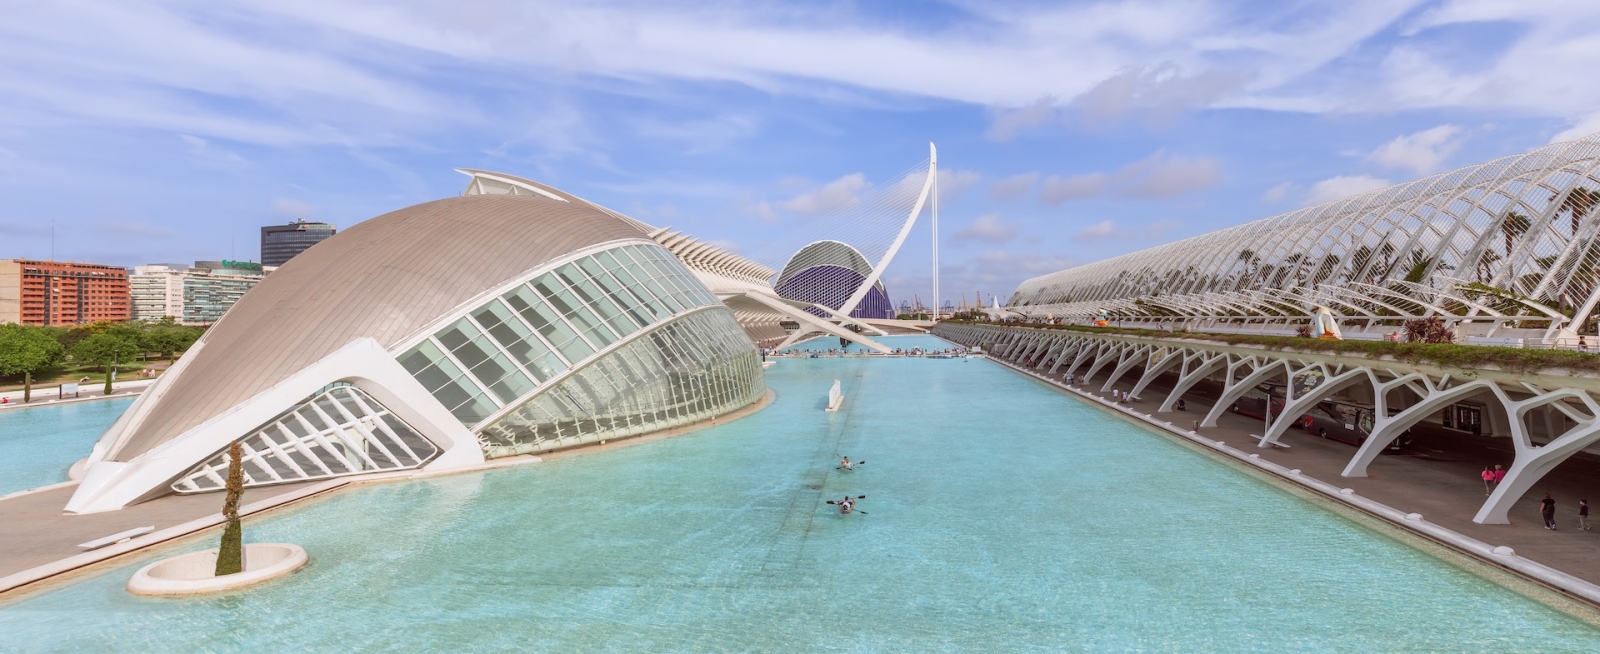 Several Pavilions of City of Art and Science in Valencia